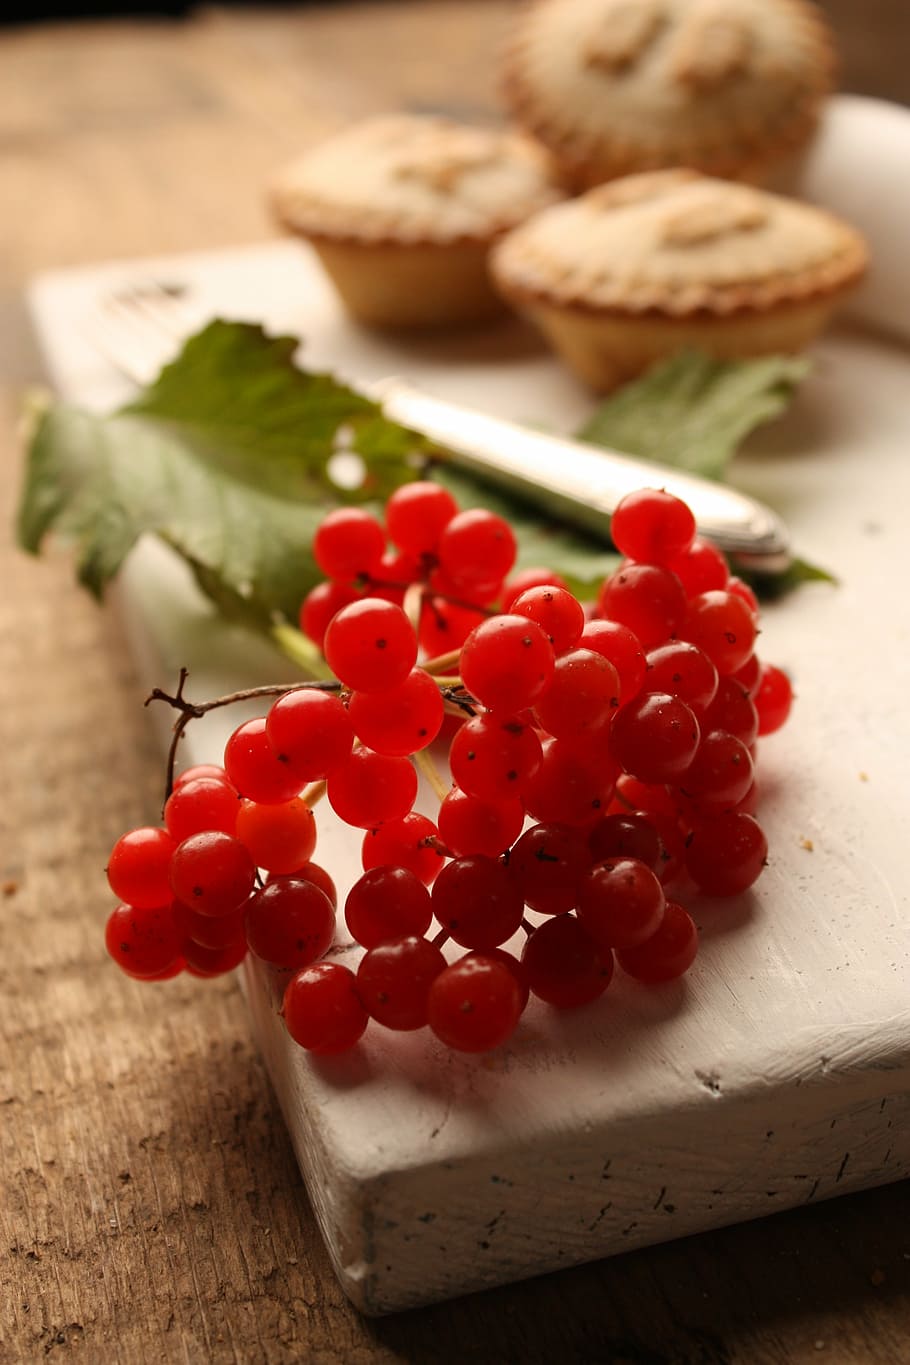 redcurrant, mince pie, christmas, food and drink, food, freshness, red, fruit, healthy eating, wellbeing